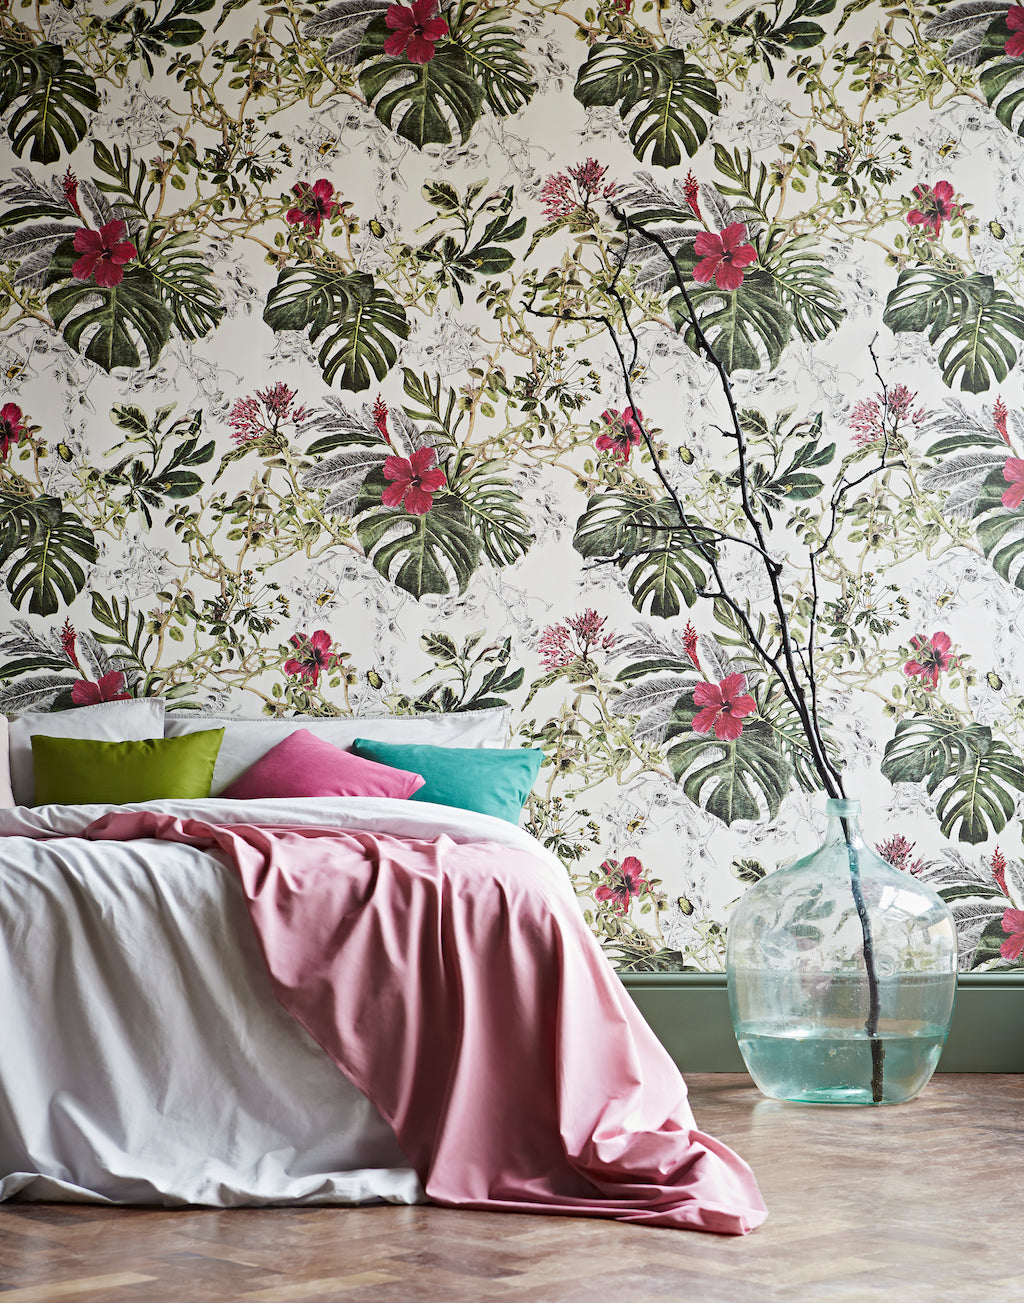 Floral Fun: How Floral Trends Have Influenced Our Wallpaper Designs